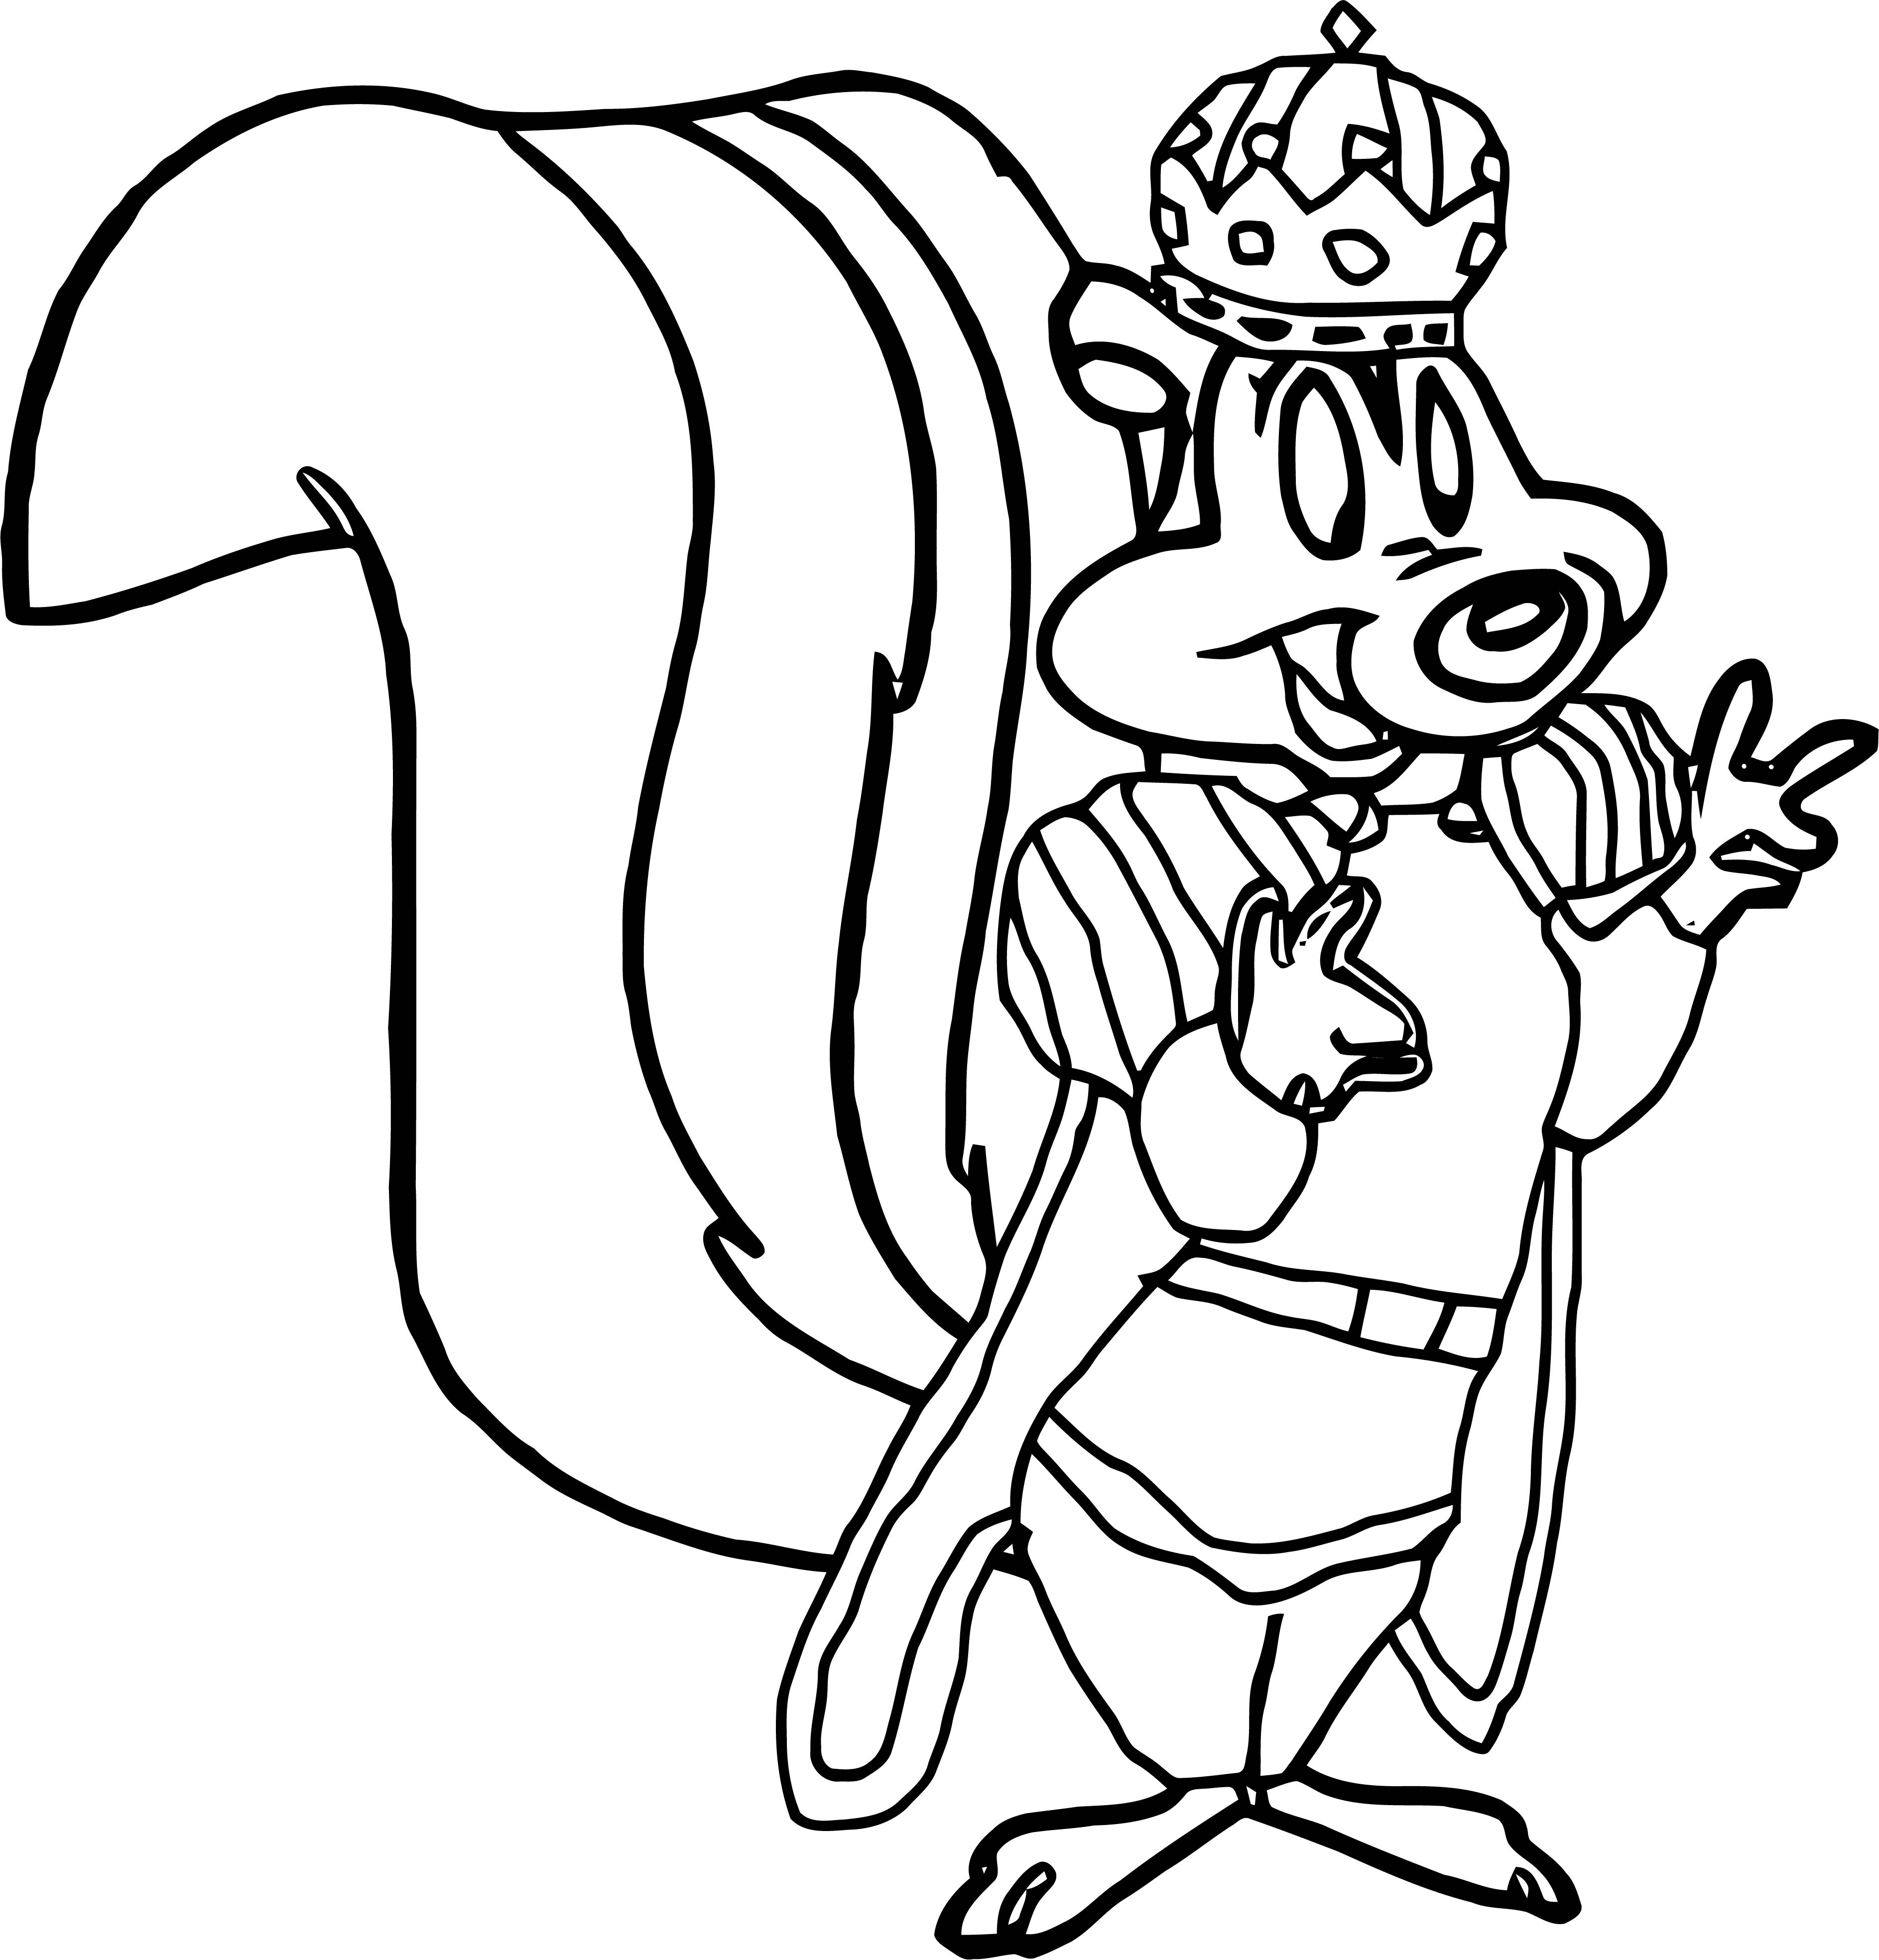 Coloring Pages Of Pepe Le Pew - boringpop.com